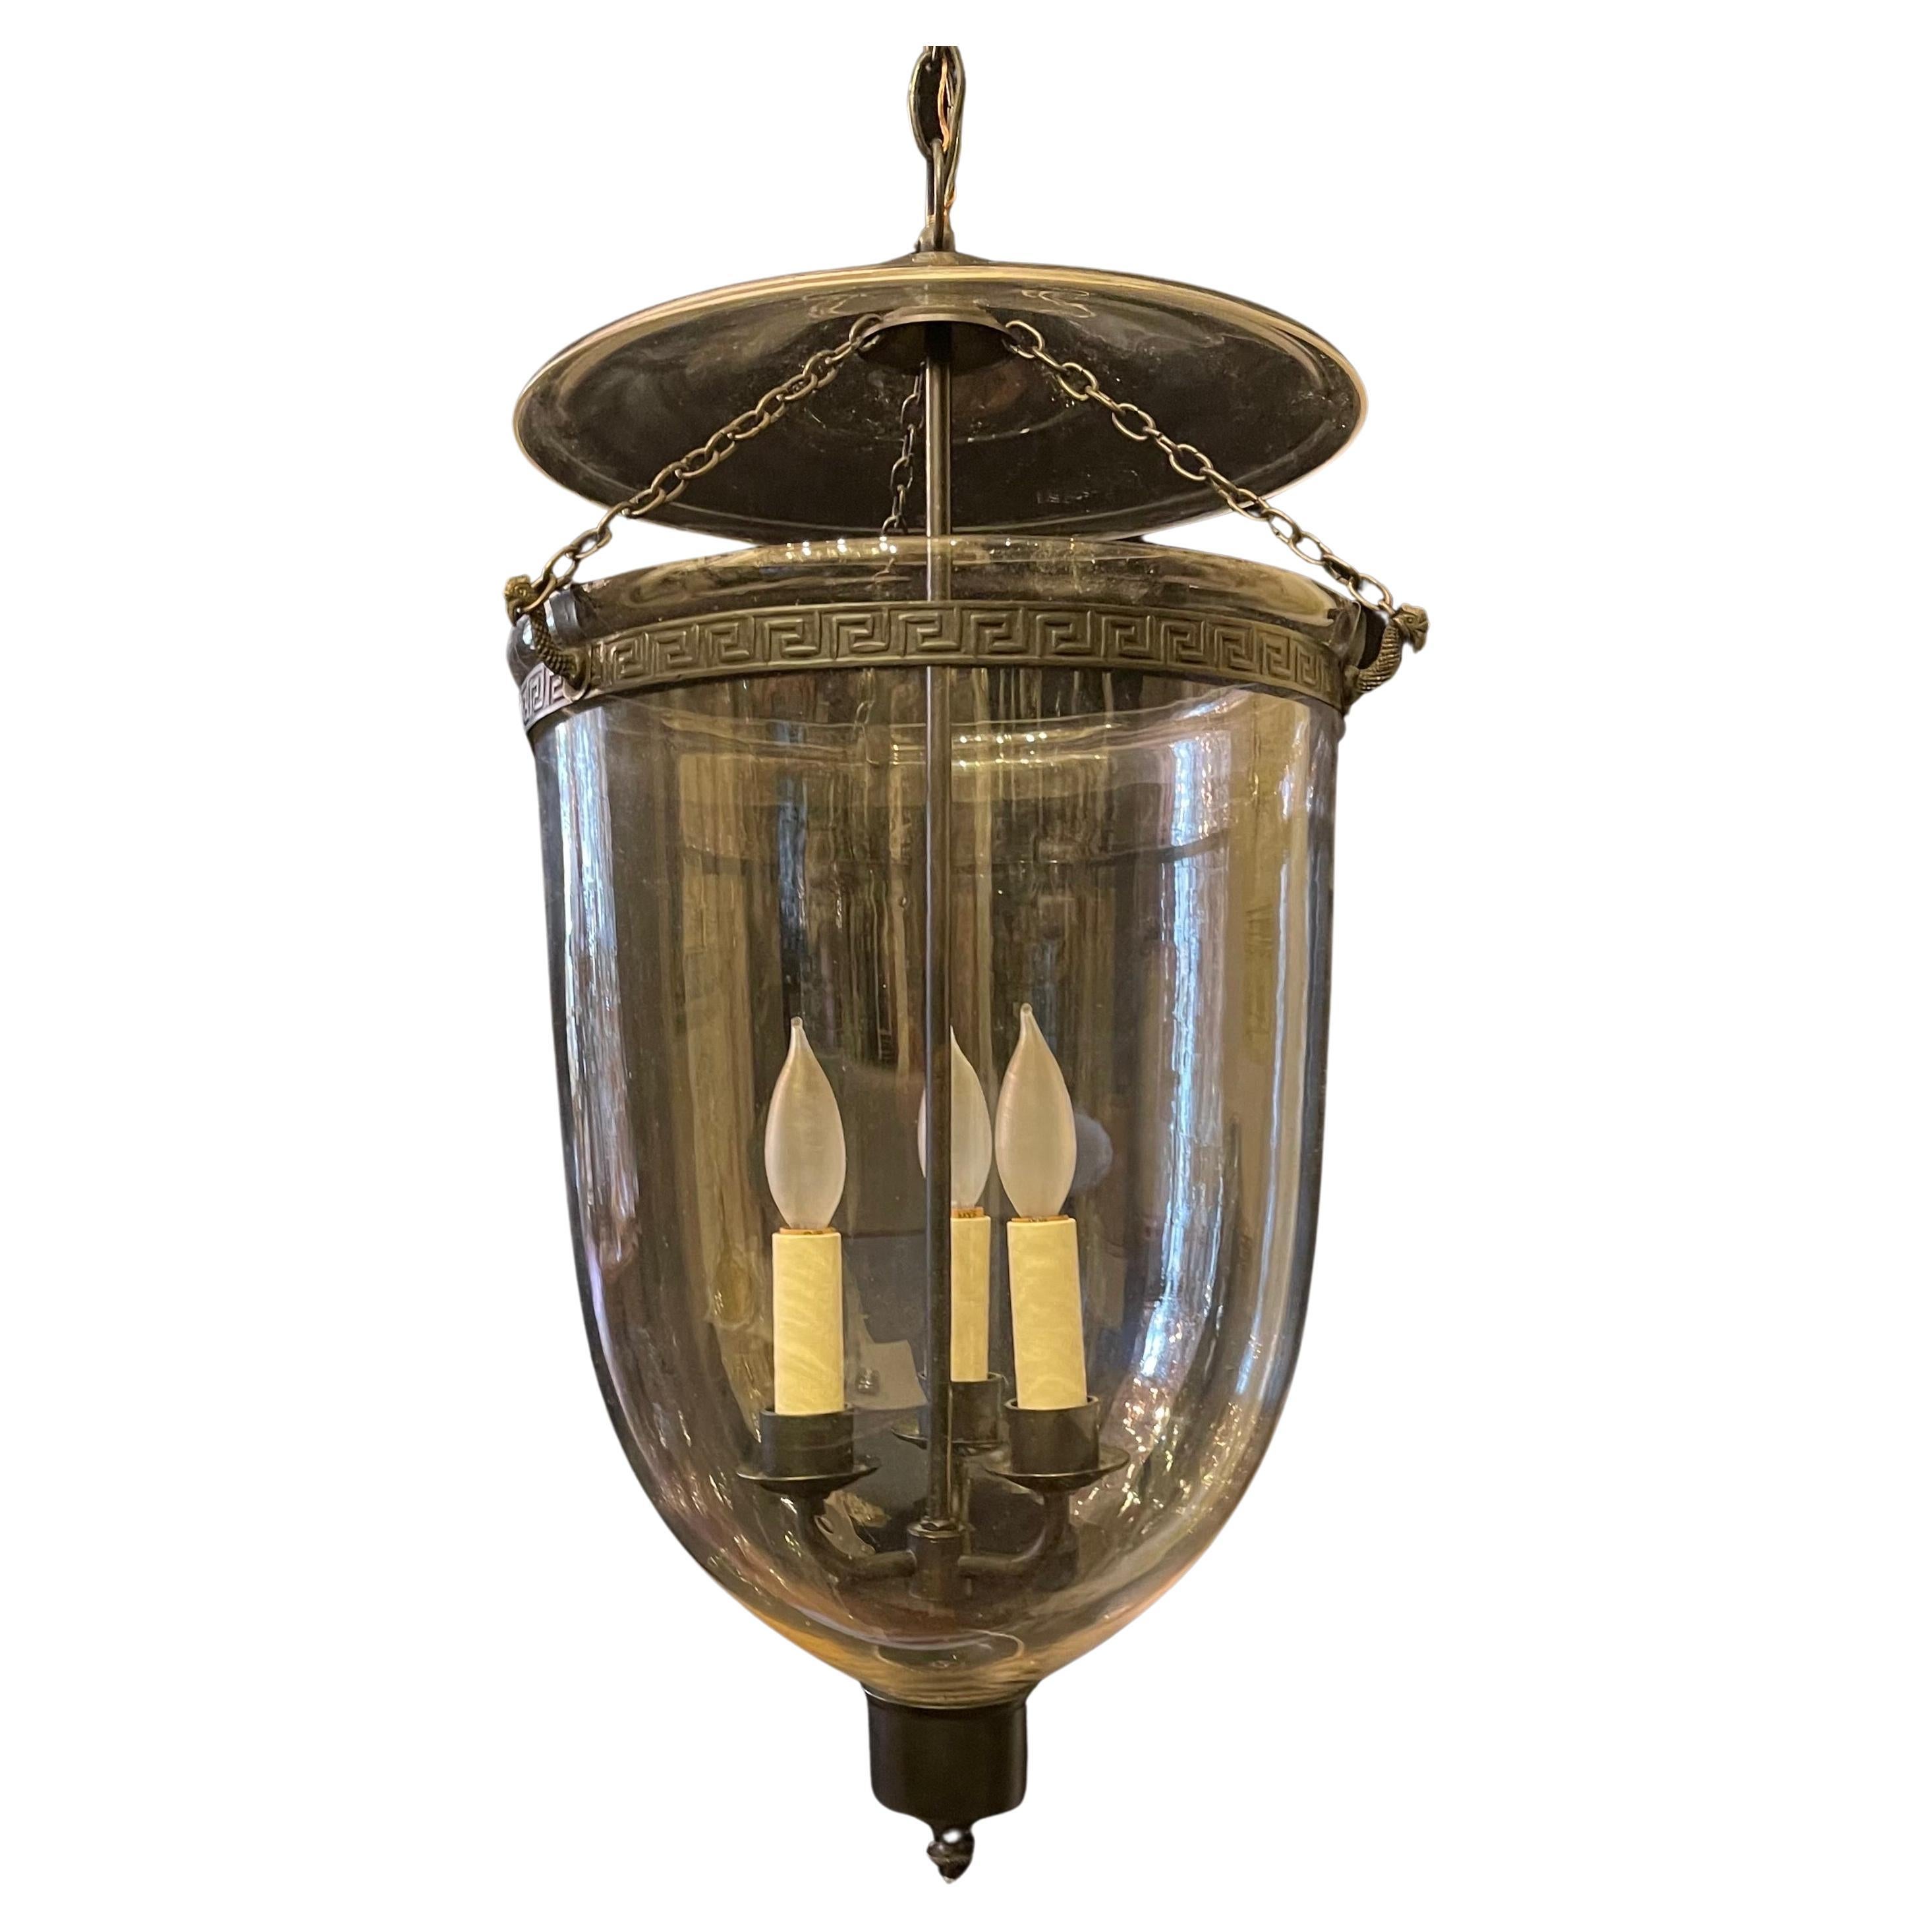 A Wonderful Large Regency Style Patinated Brass And Clear Blown Glass Bell Jar Lantern Fixture With 3 Rewired Candelabra Sockets